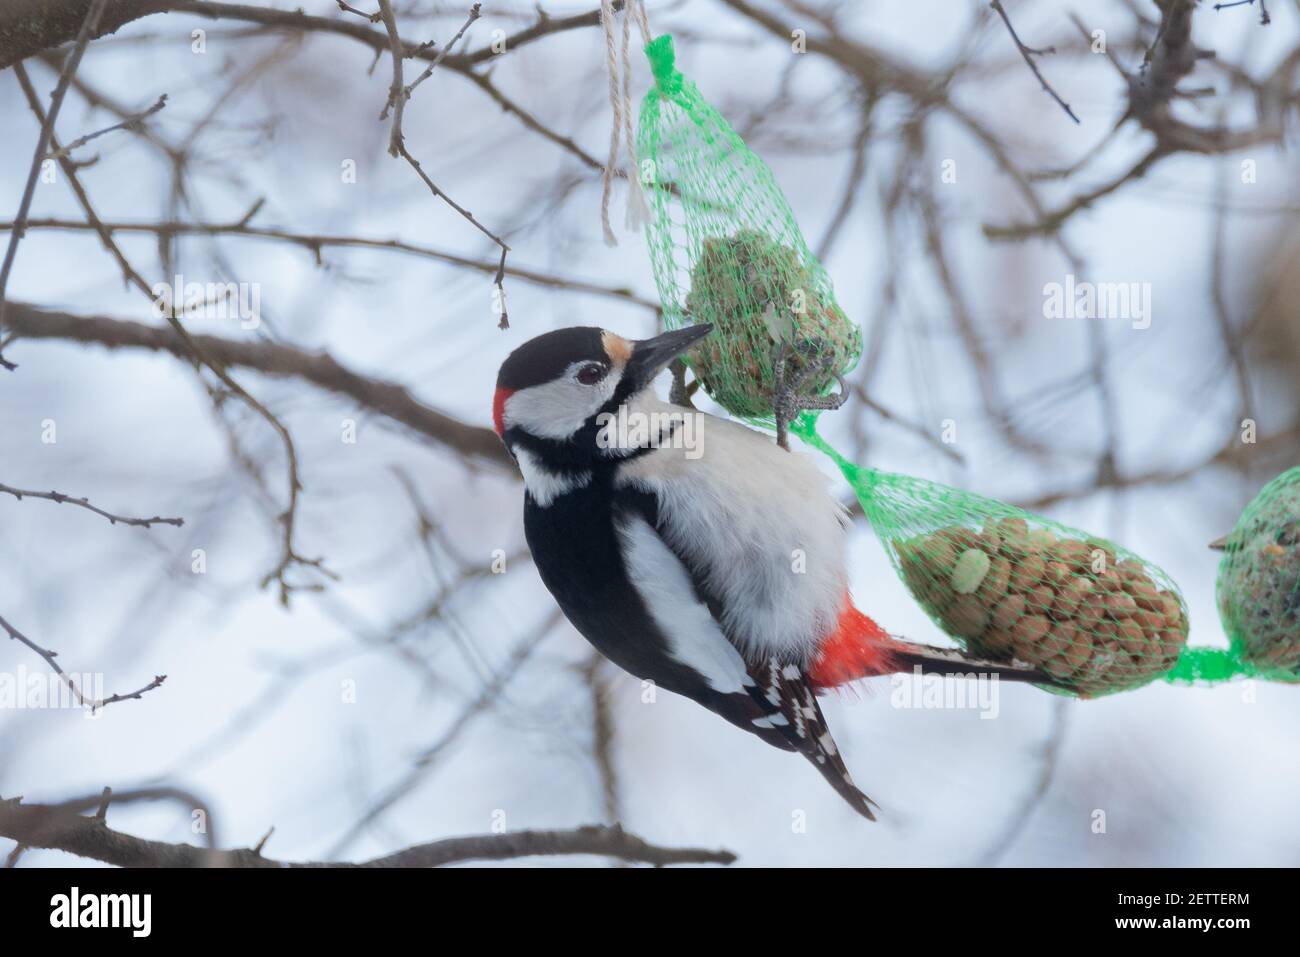 Great Spotted Woodpecker (Dendrocopos major) Eating from a Tit Dumpling Stock Photo